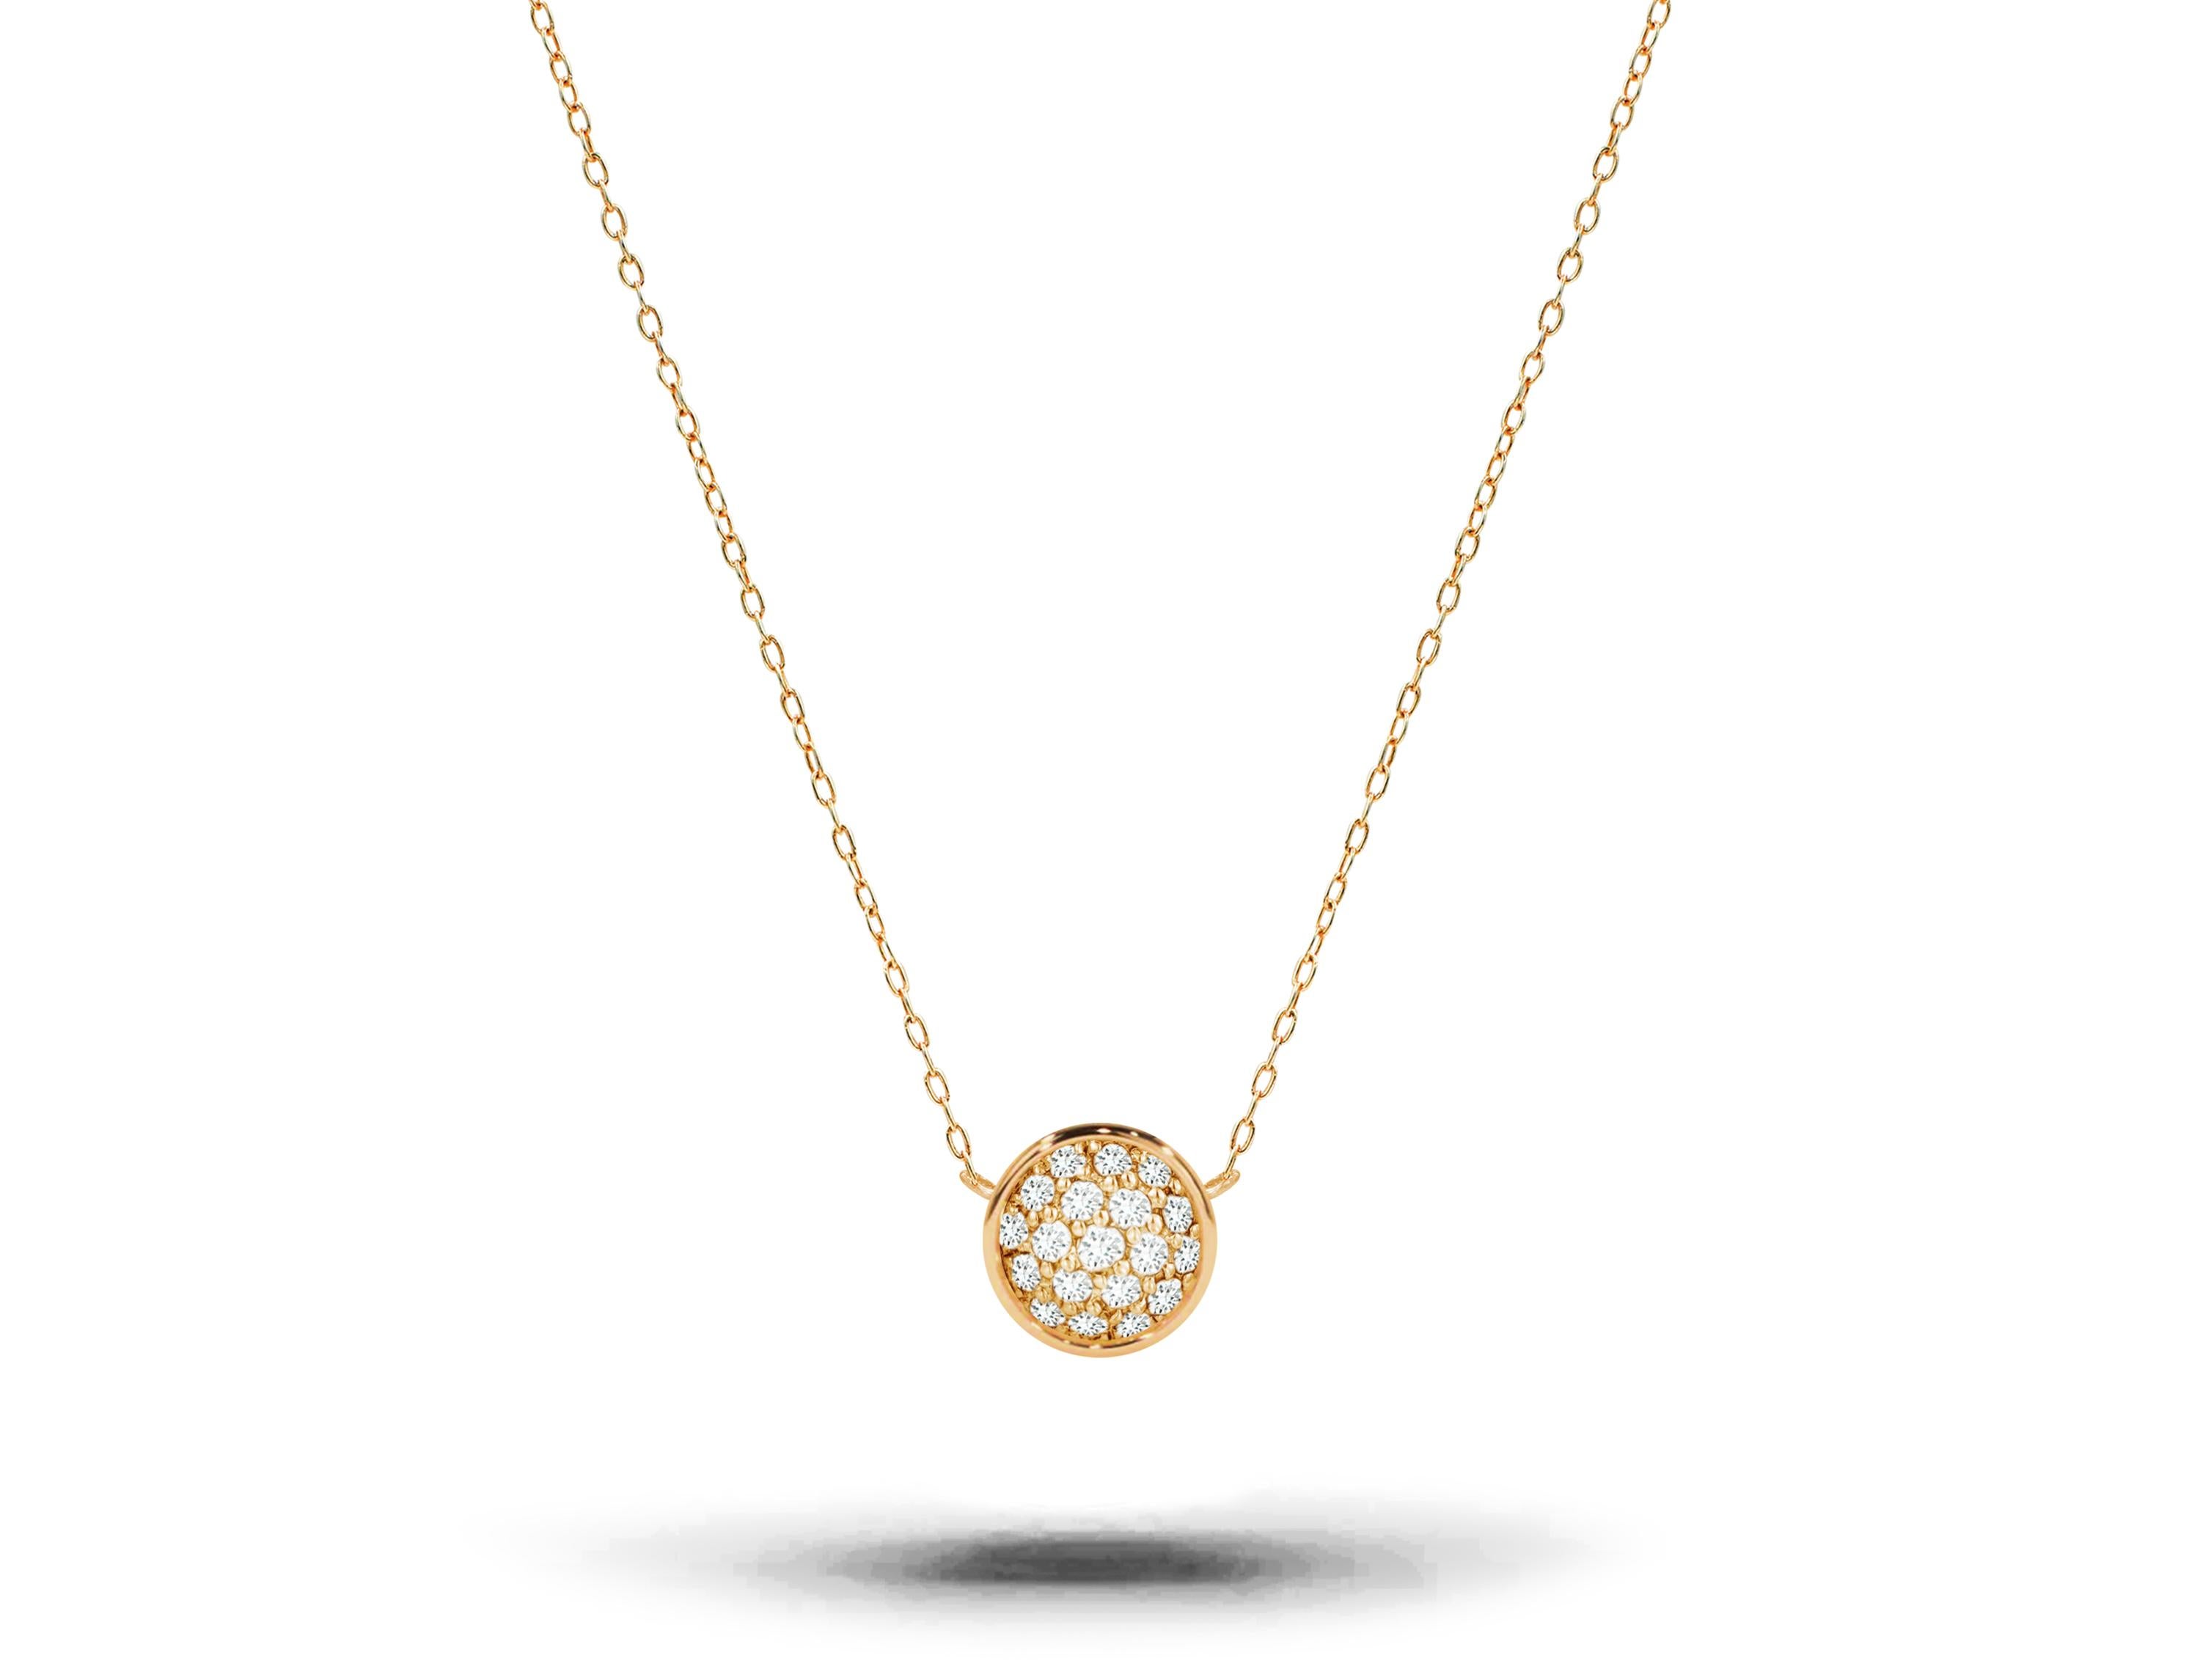 18k Solid Gold tiny circle necklace showcasing 19 Brilliant round Diamond pave set by master setter at jewels by tarry studio. Each diamond is hand-selected by me to ensure quality. This stylish gold diamond heart pendant necklace is a fabulous